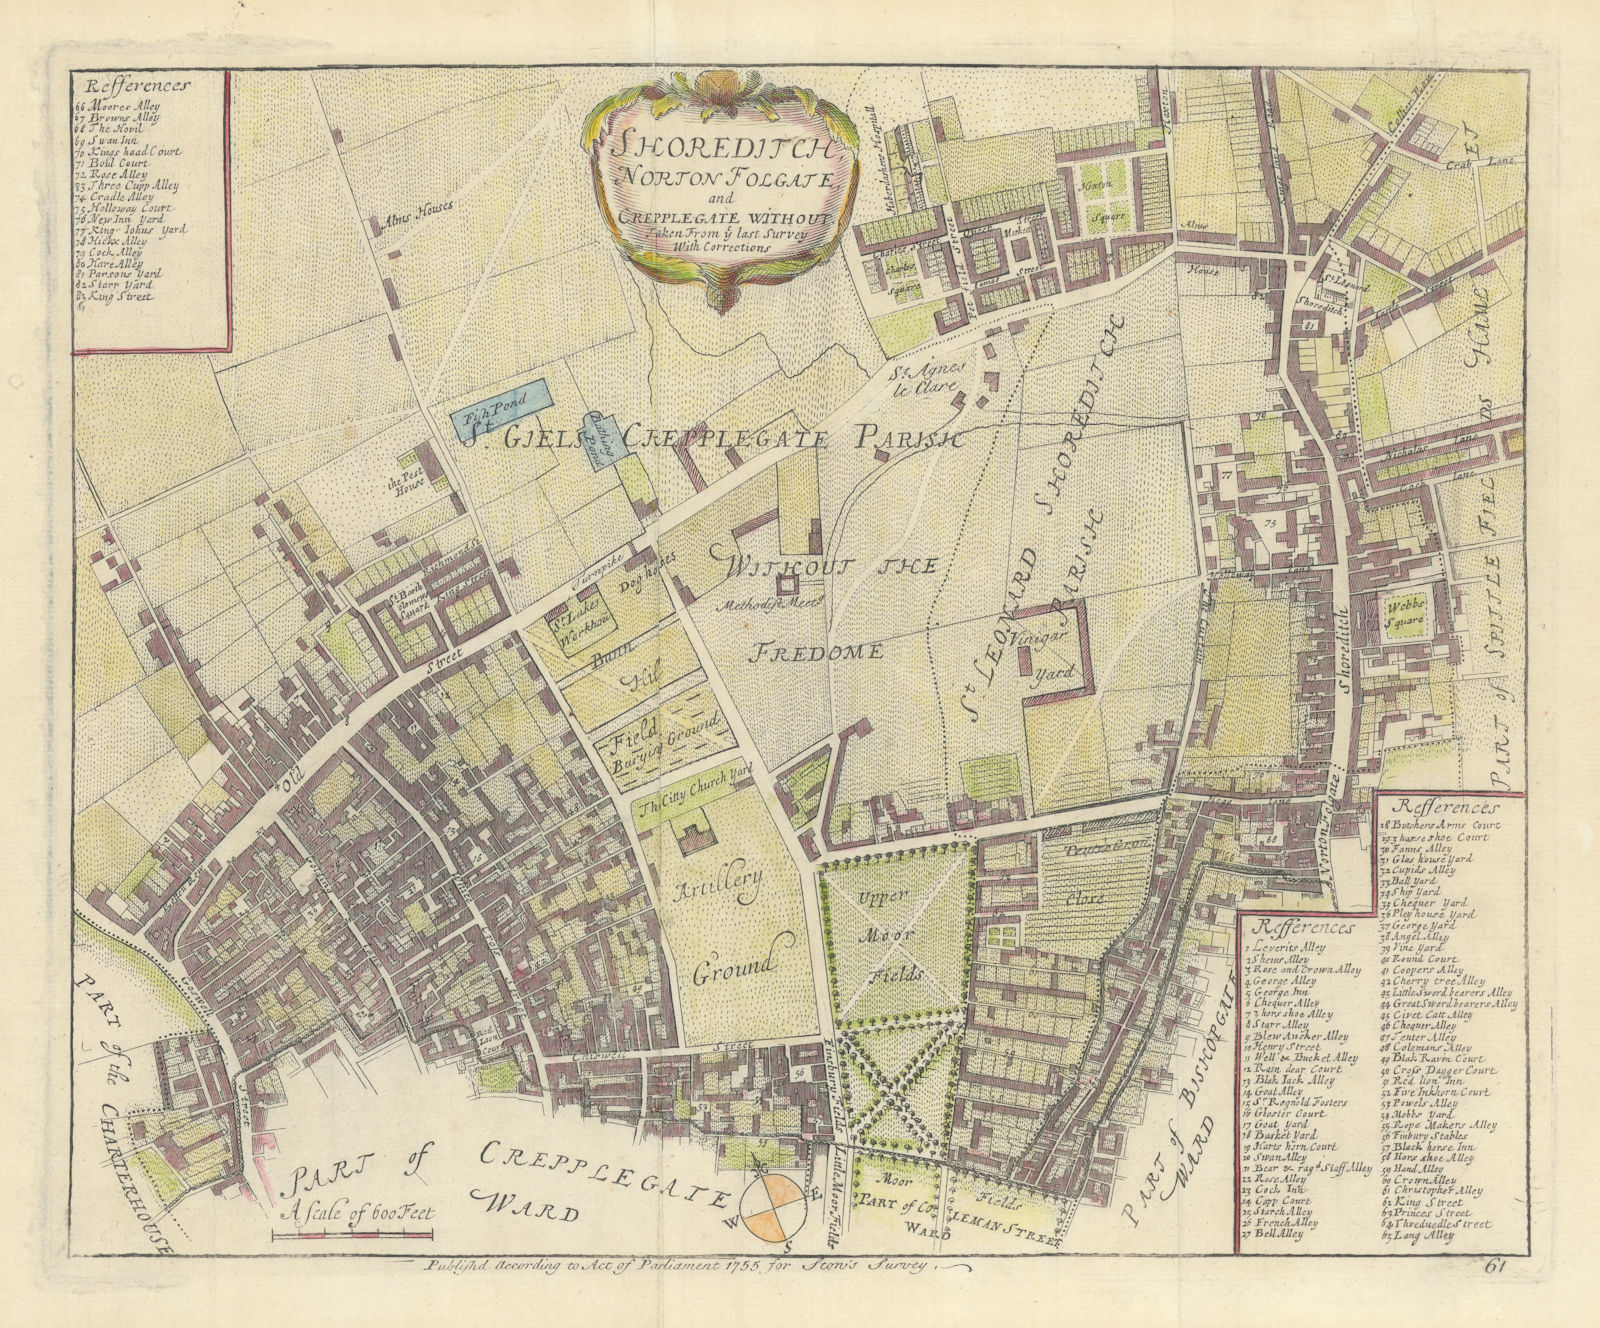 Shoreditch, Norton Folgate & Cripplegate Without. Hoxton. STOW/STRYPE 1755 map